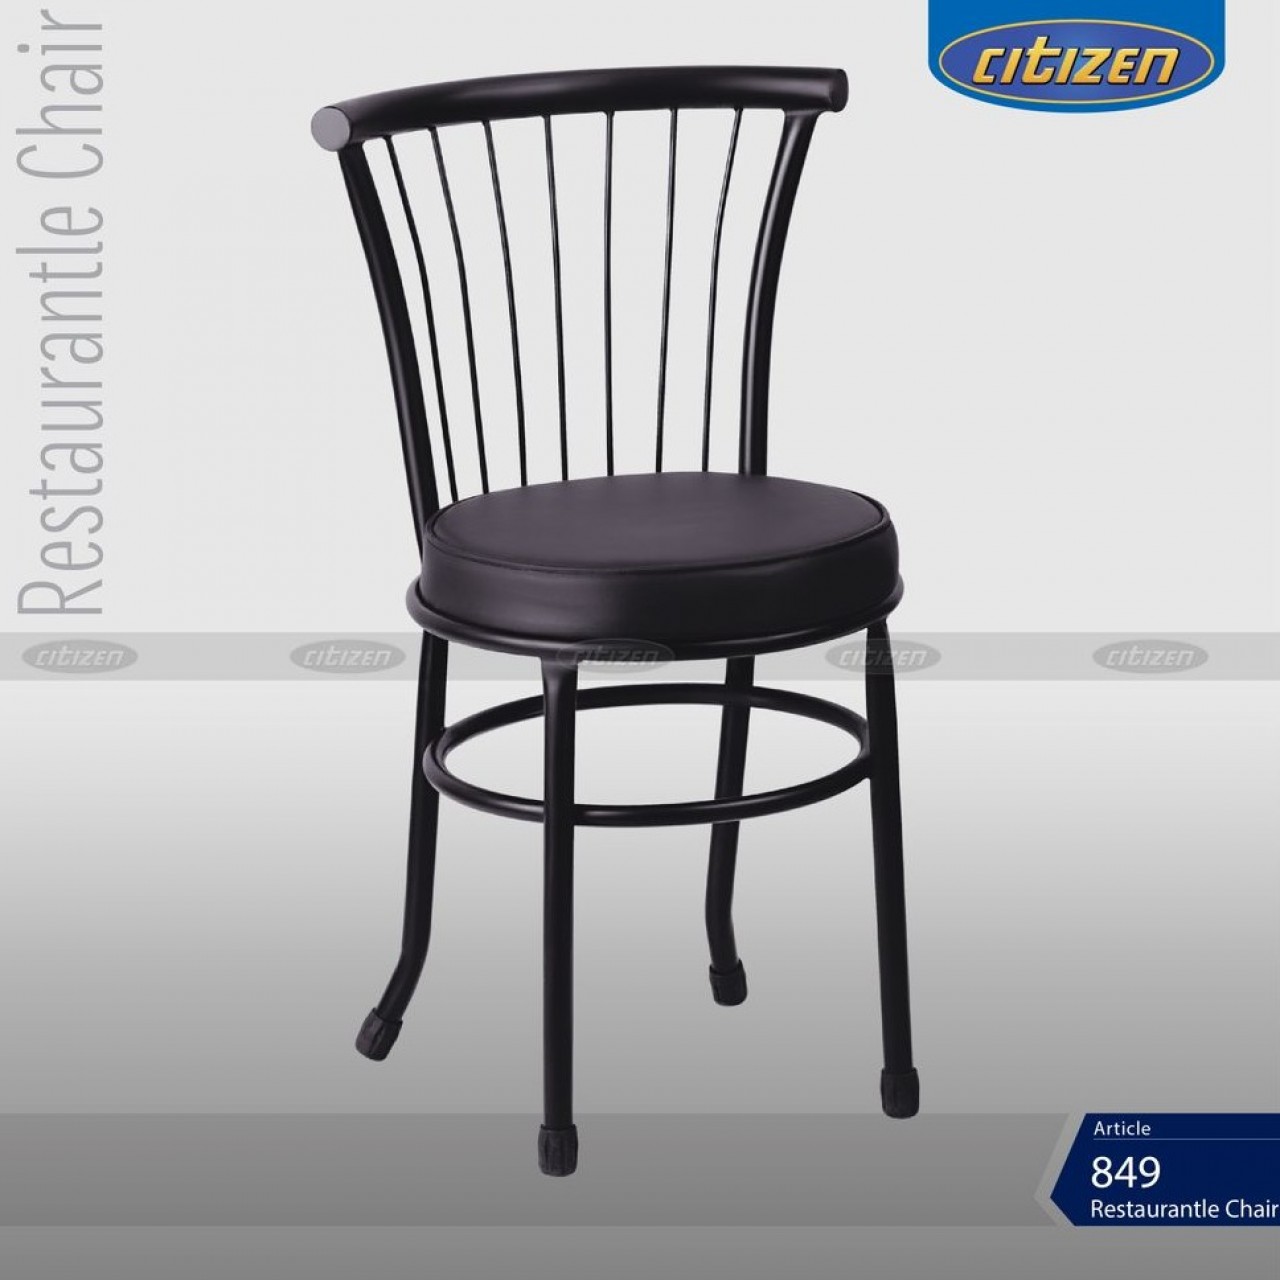 Citizen 849-A Steel Chair - Furniture For Kitchen & Home